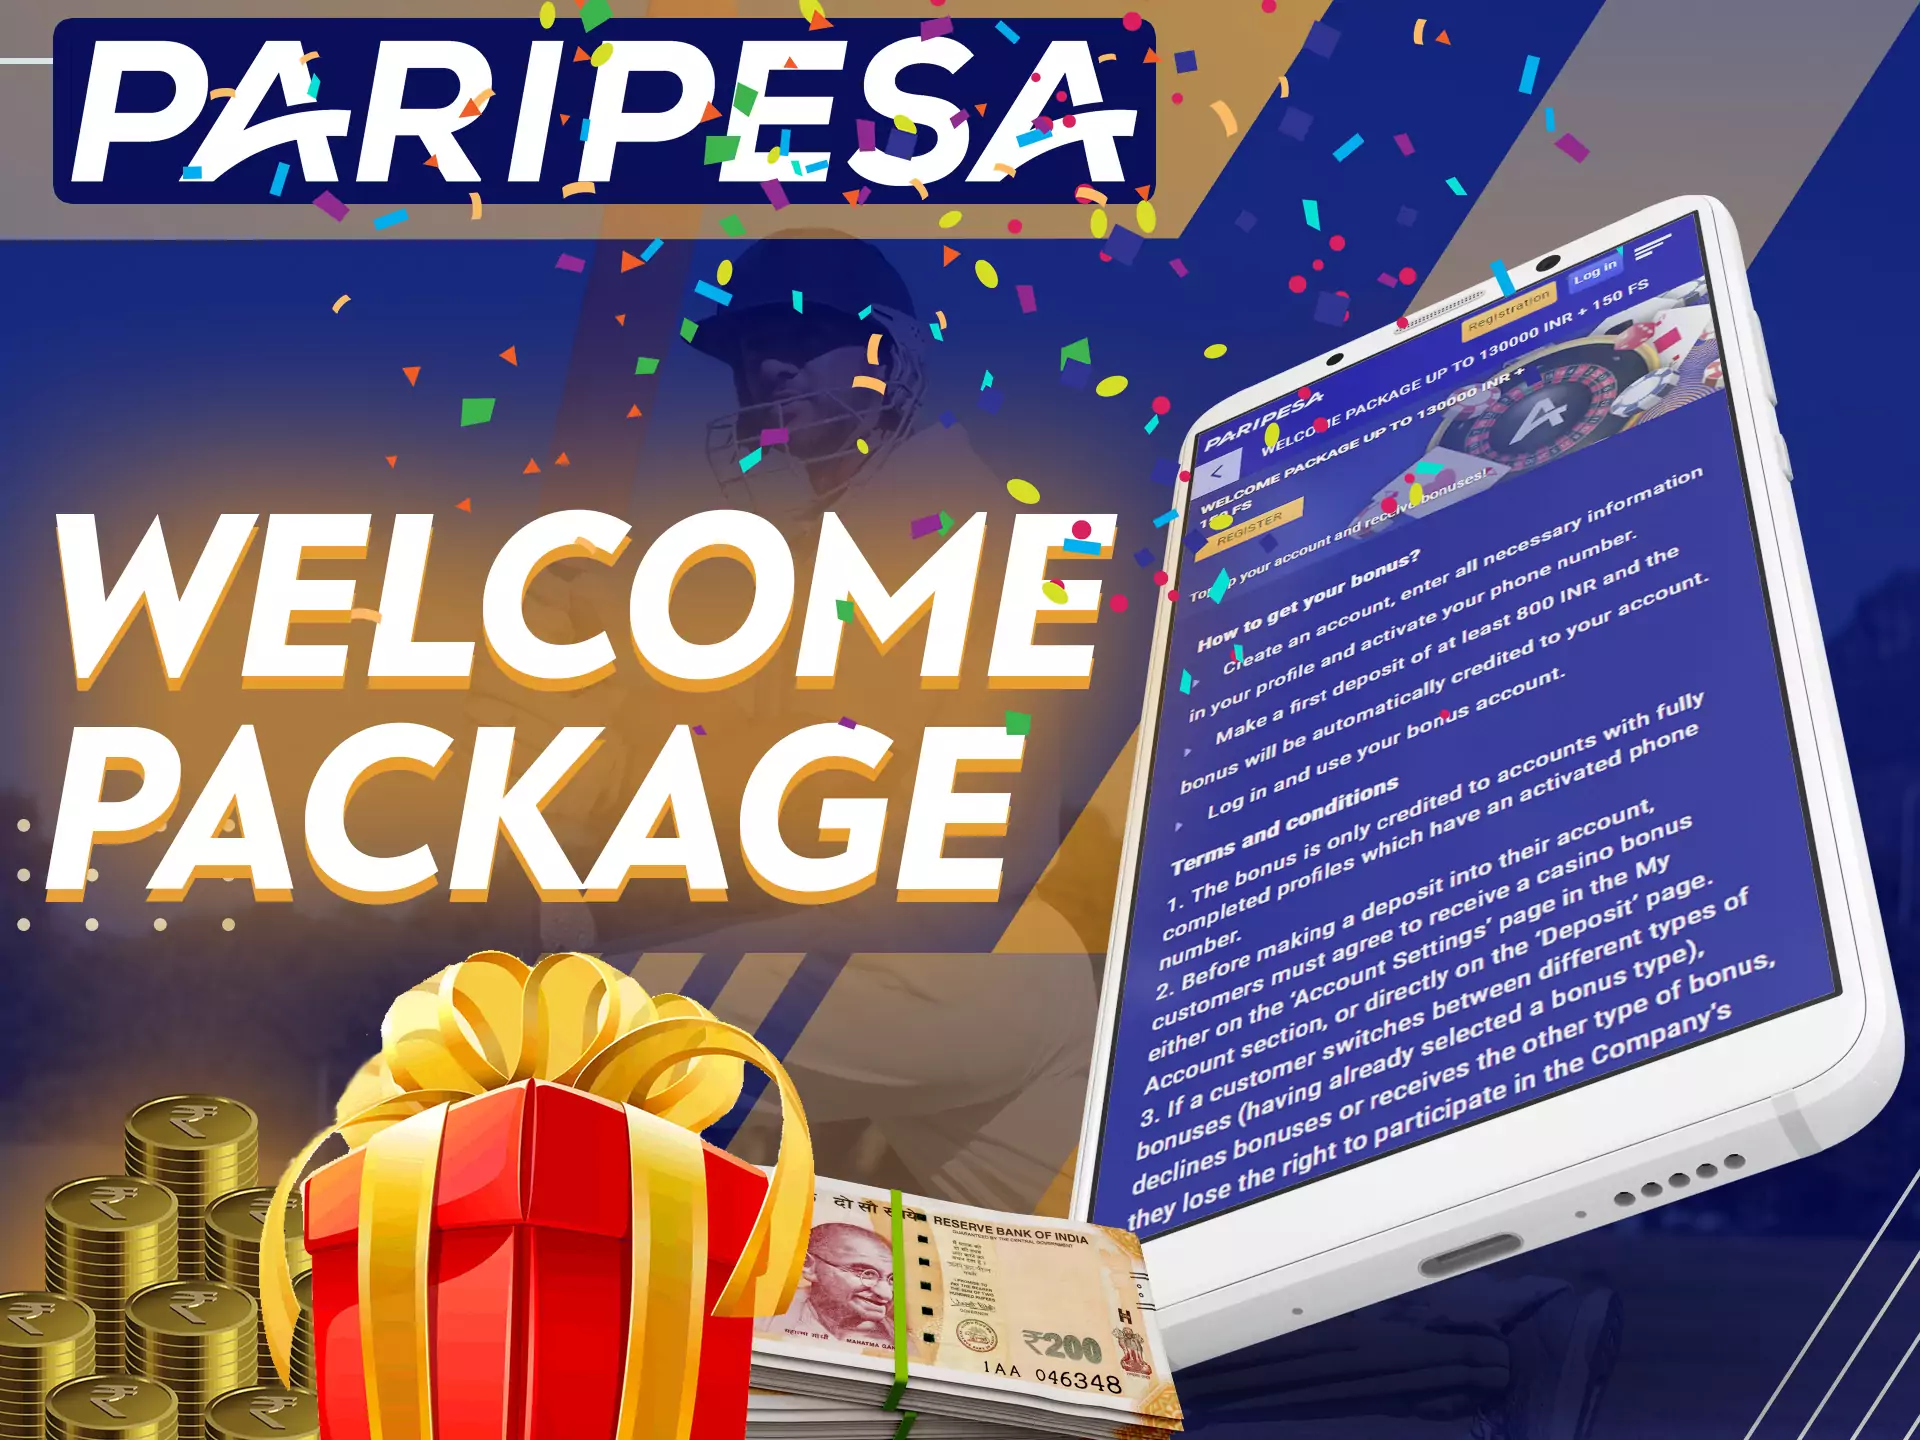 On the Paripesa app, be sure to get your welcome bonus.